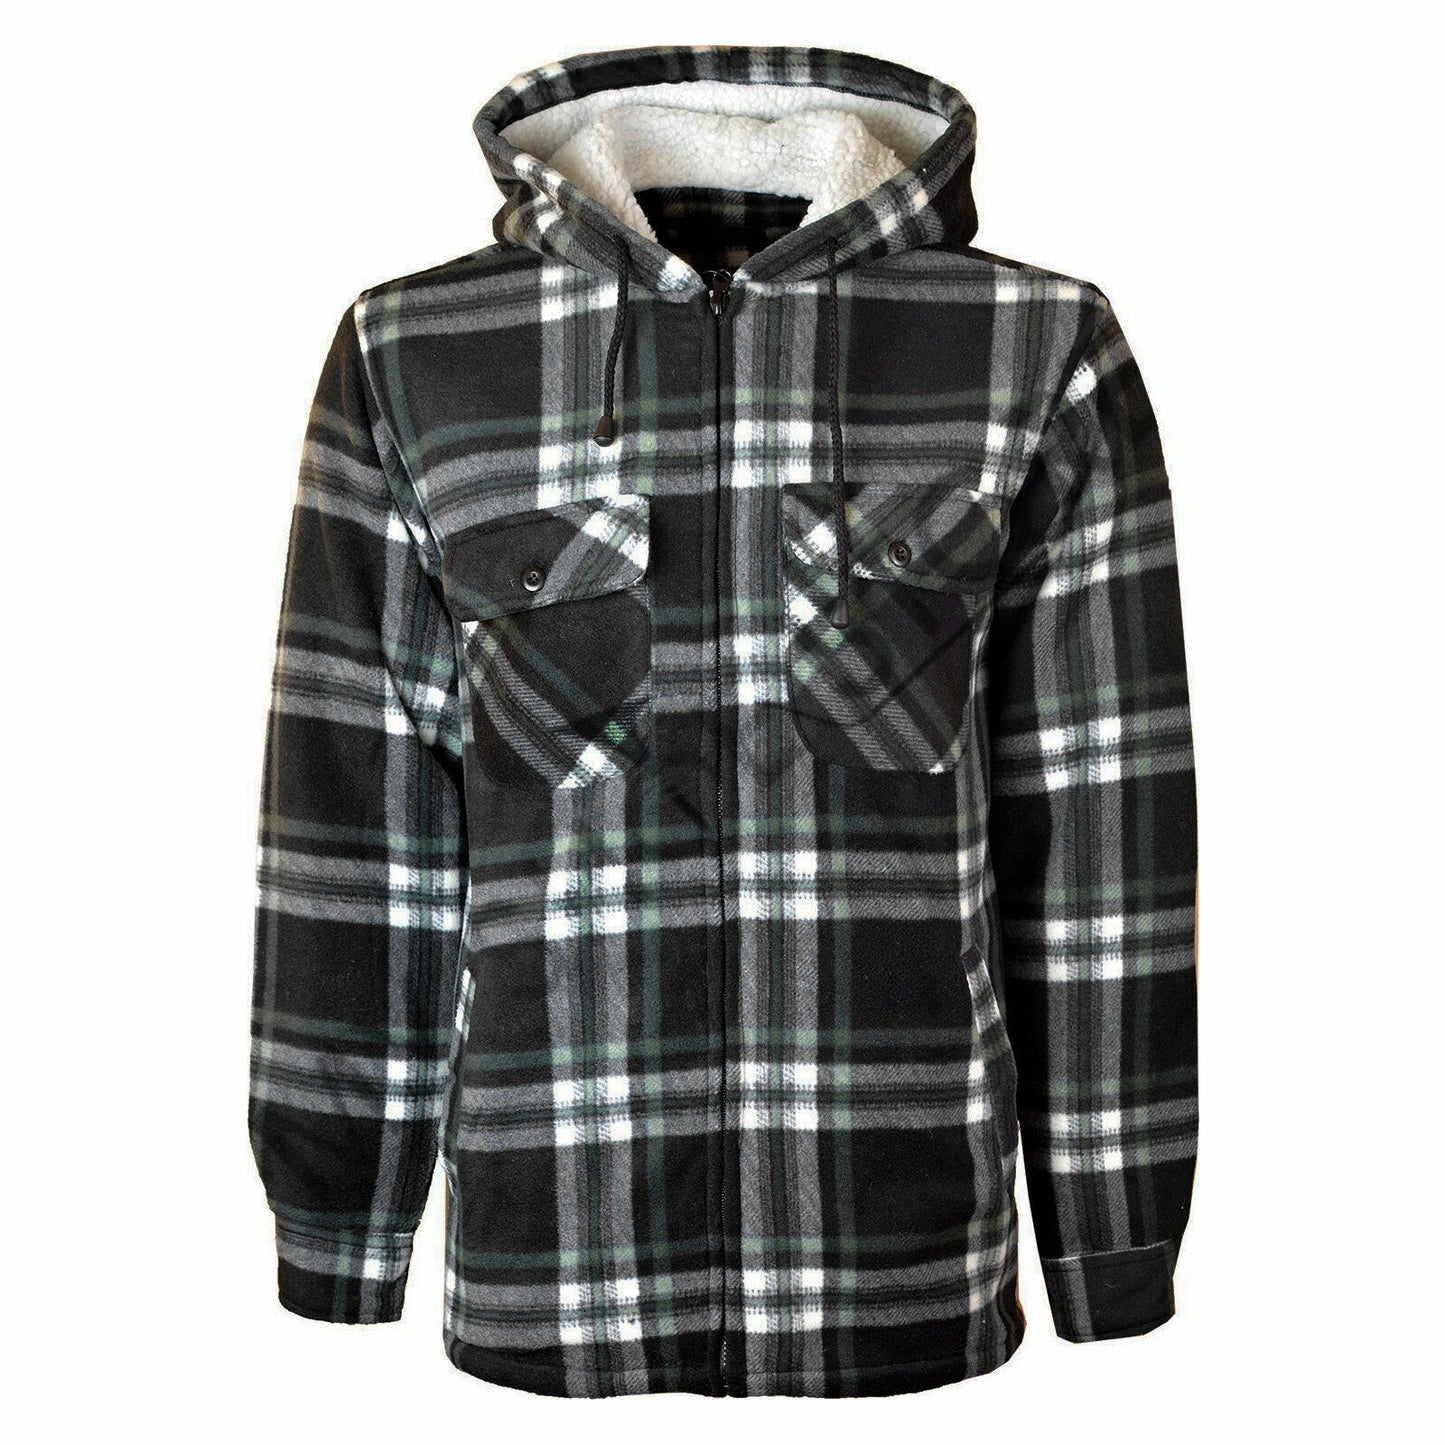 MENS PADDED SHIRT FUR LINED LUMBERJACK FLANNEL WORK JACKET WARM THICK CASUAL TOP